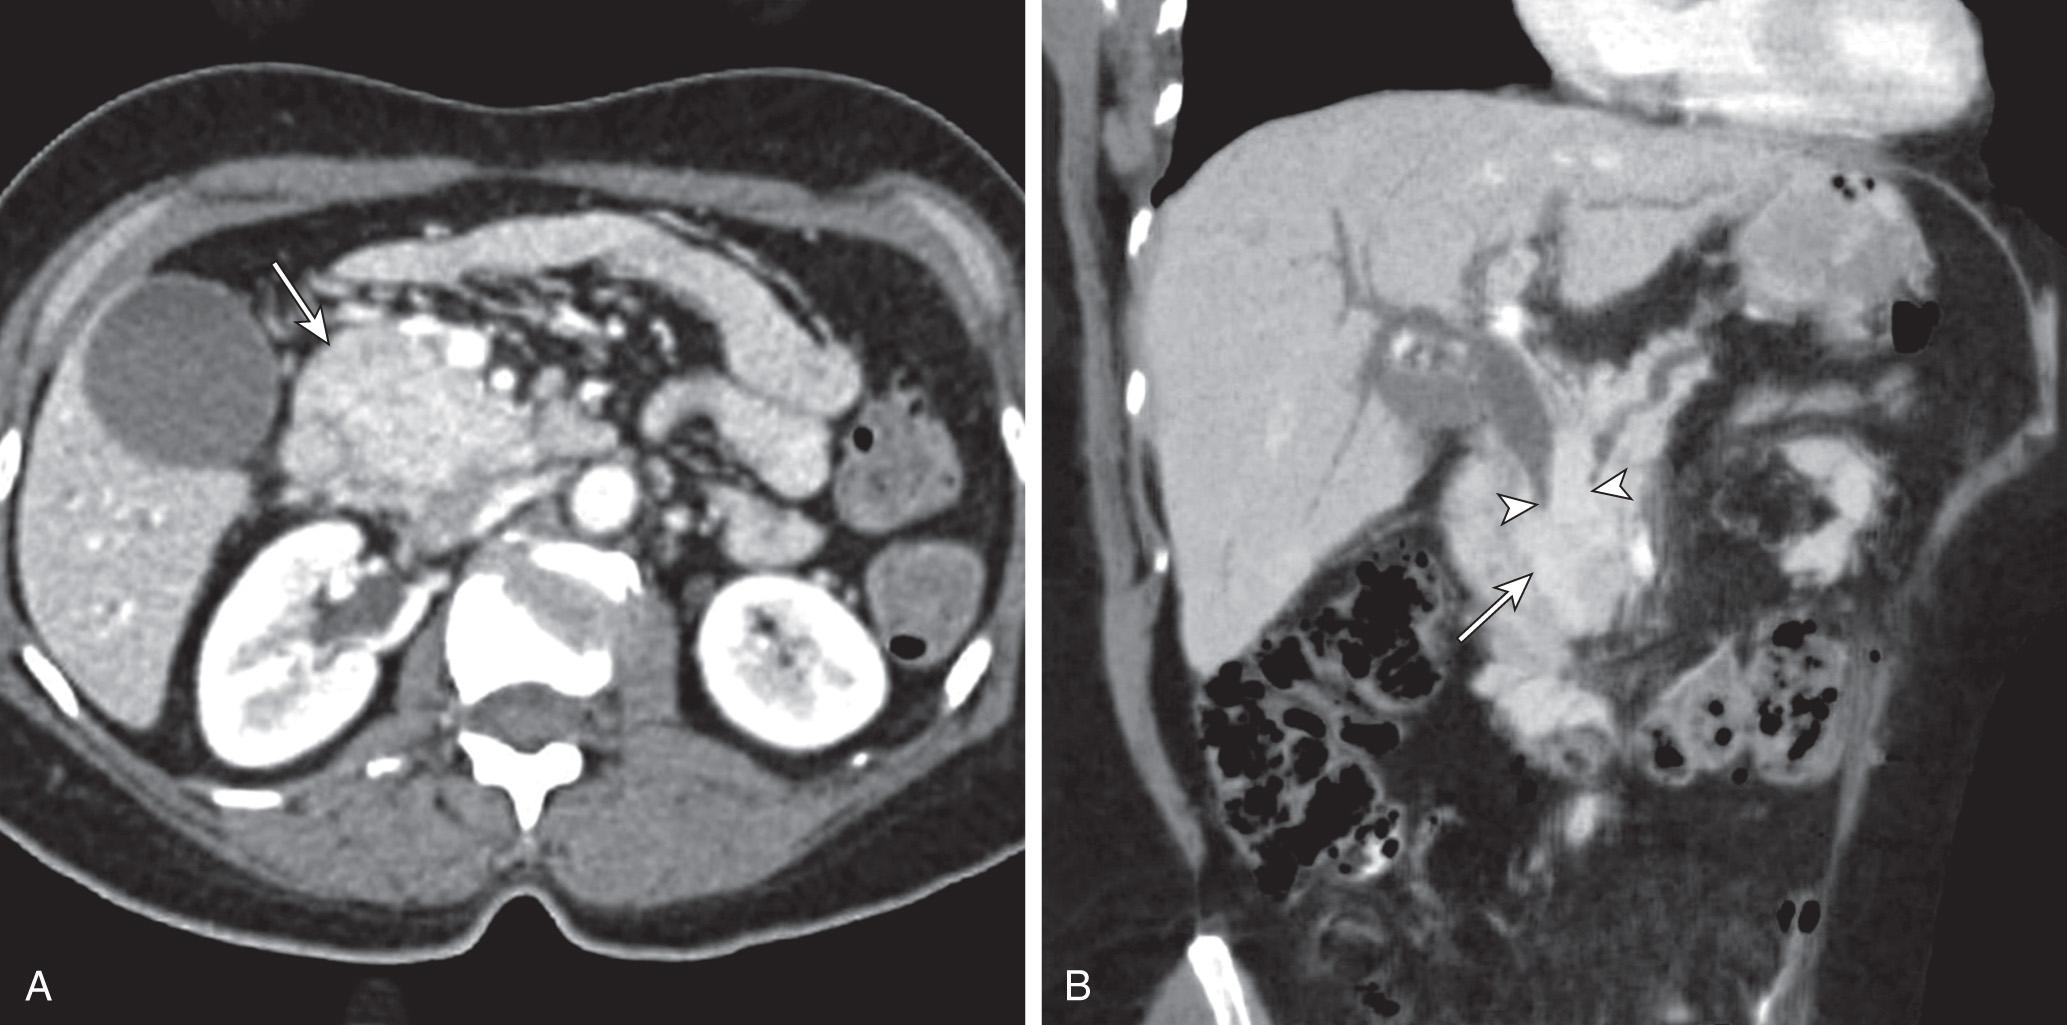 FIGURE 100.1, A 57-year-old female with history of pancreatic adenocarcinoma. (A) Axial computed tomography image of the abdomen obtained in the venous phase demonstrates a large mass in the region of the head of the pancreas (arrow) . (B) Minimum intensity projection in the coronal plane better demonstrates the pancreatic mass (arrow) , resulting in a “double duct” sign (arrowheads) .